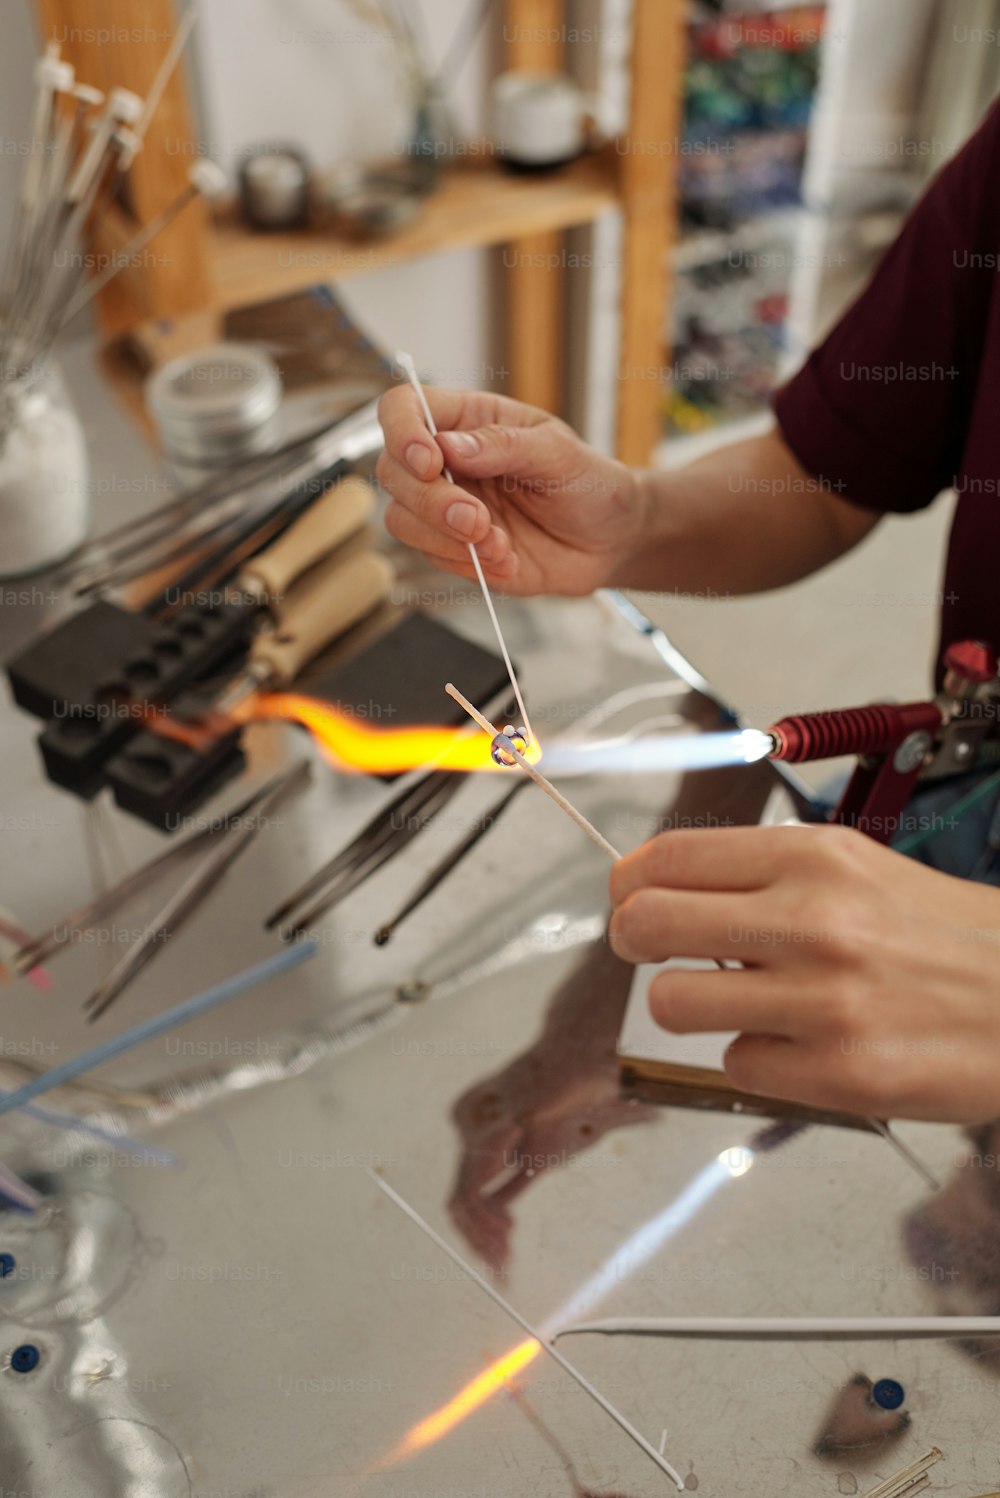 Hands of young female professional lampworker burning glass workpiece with fire while holding it over burner in workshop or studio